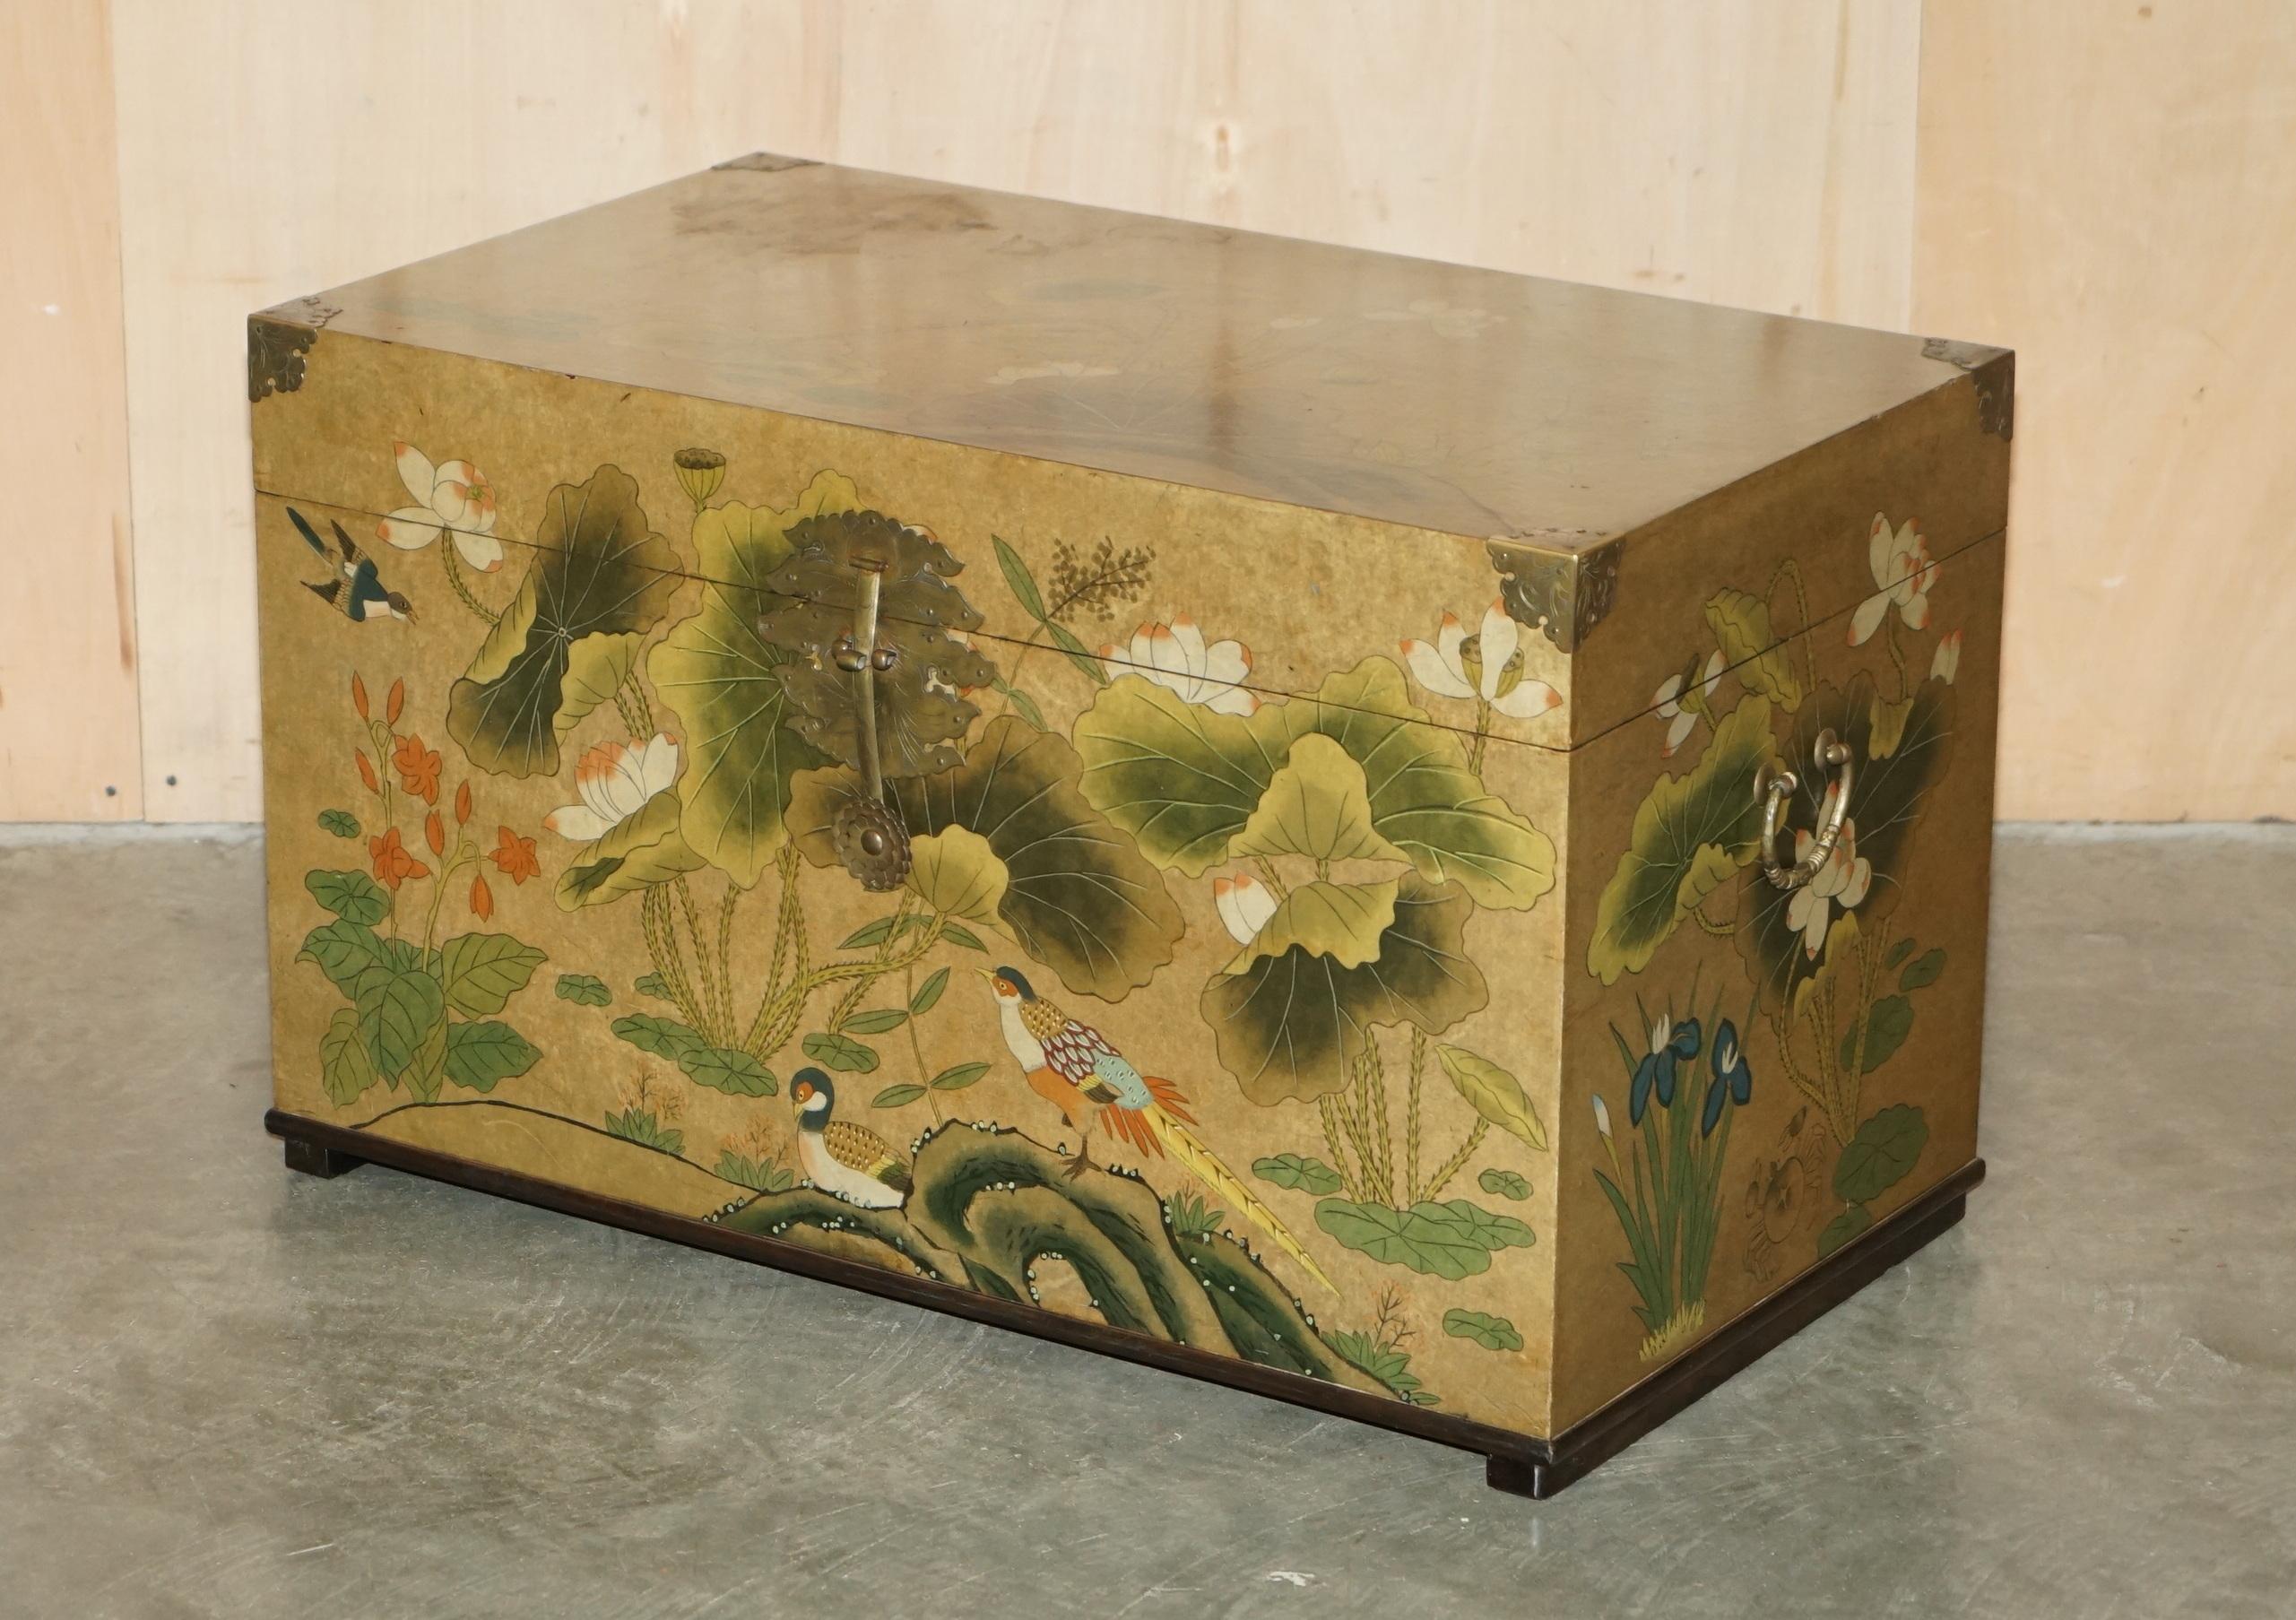 Royal House Antiques

Royal House Antiques is delighted to offer for sale this lovely Chinese Elm with brass strap work storage trunk 

Please note the delivery fee listed is just a guide, it covers within the M25 only for the UK and local Europe